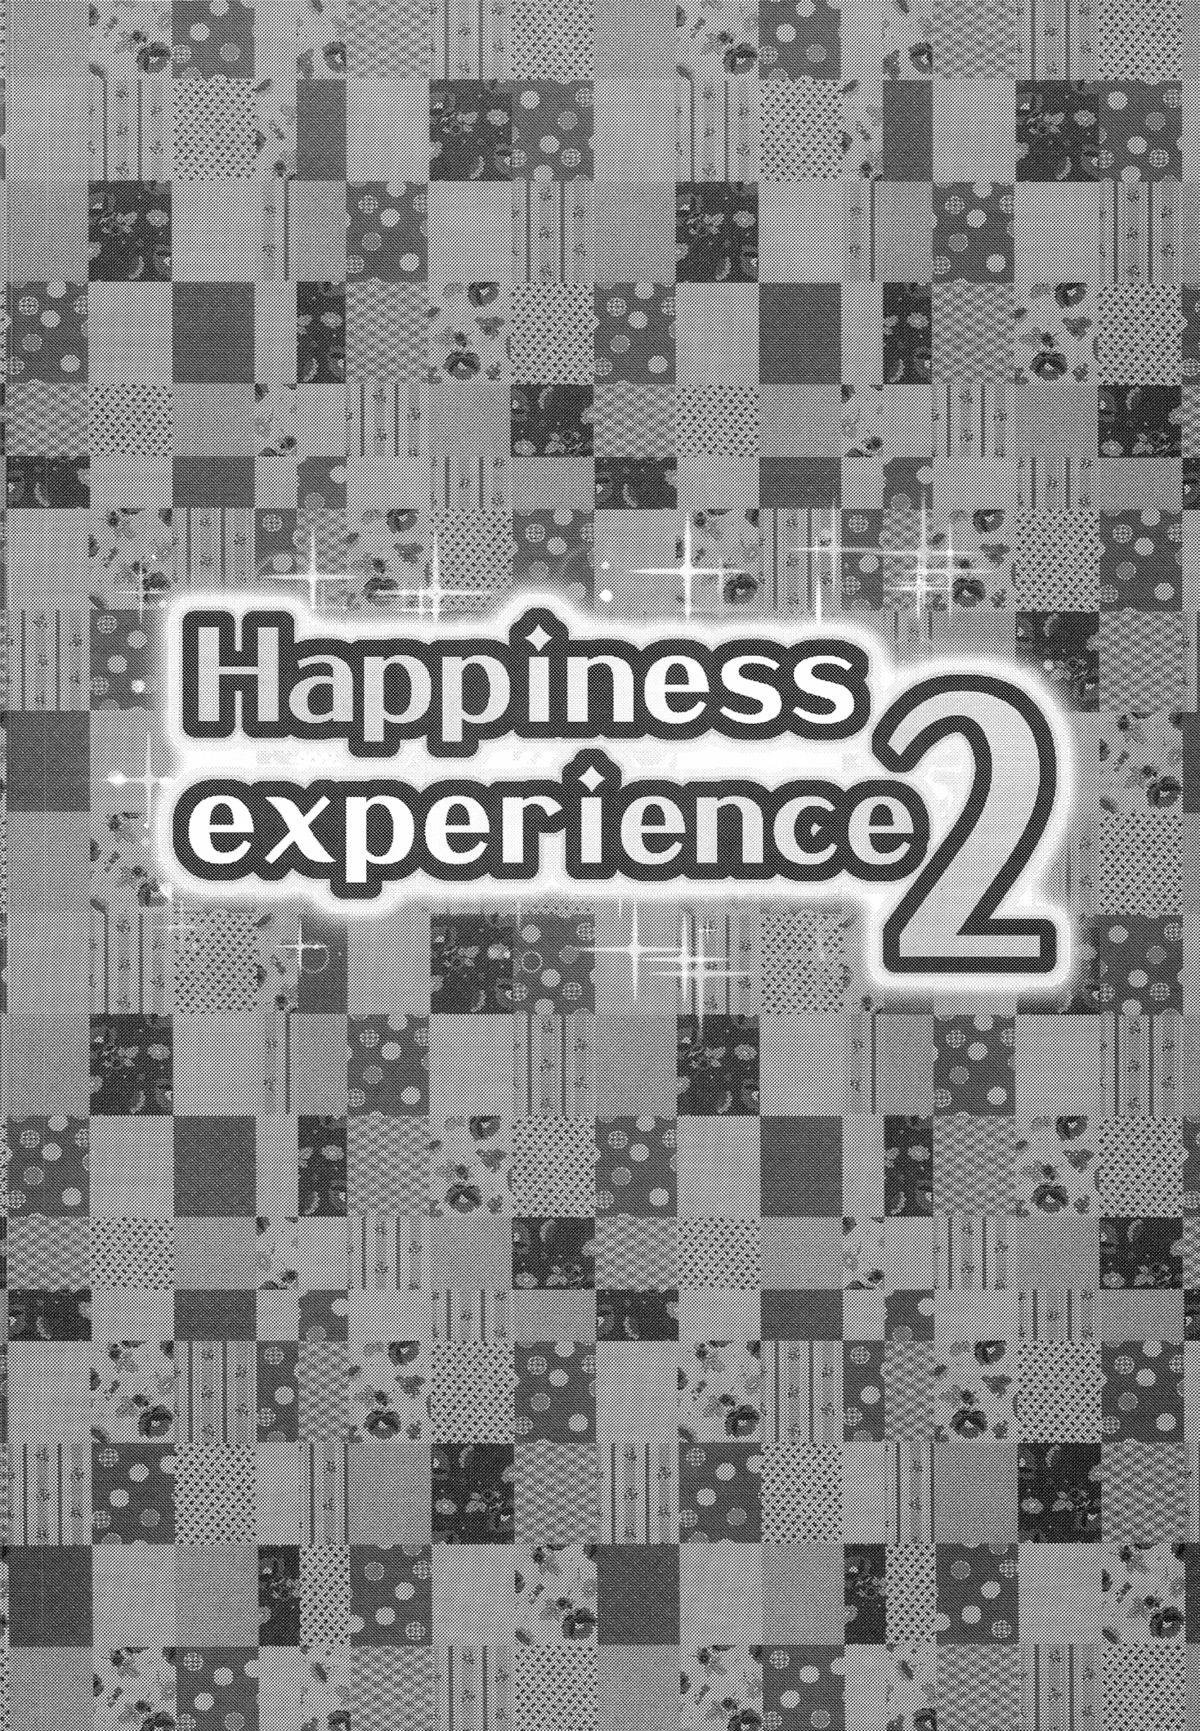 Happiness experience 2 2